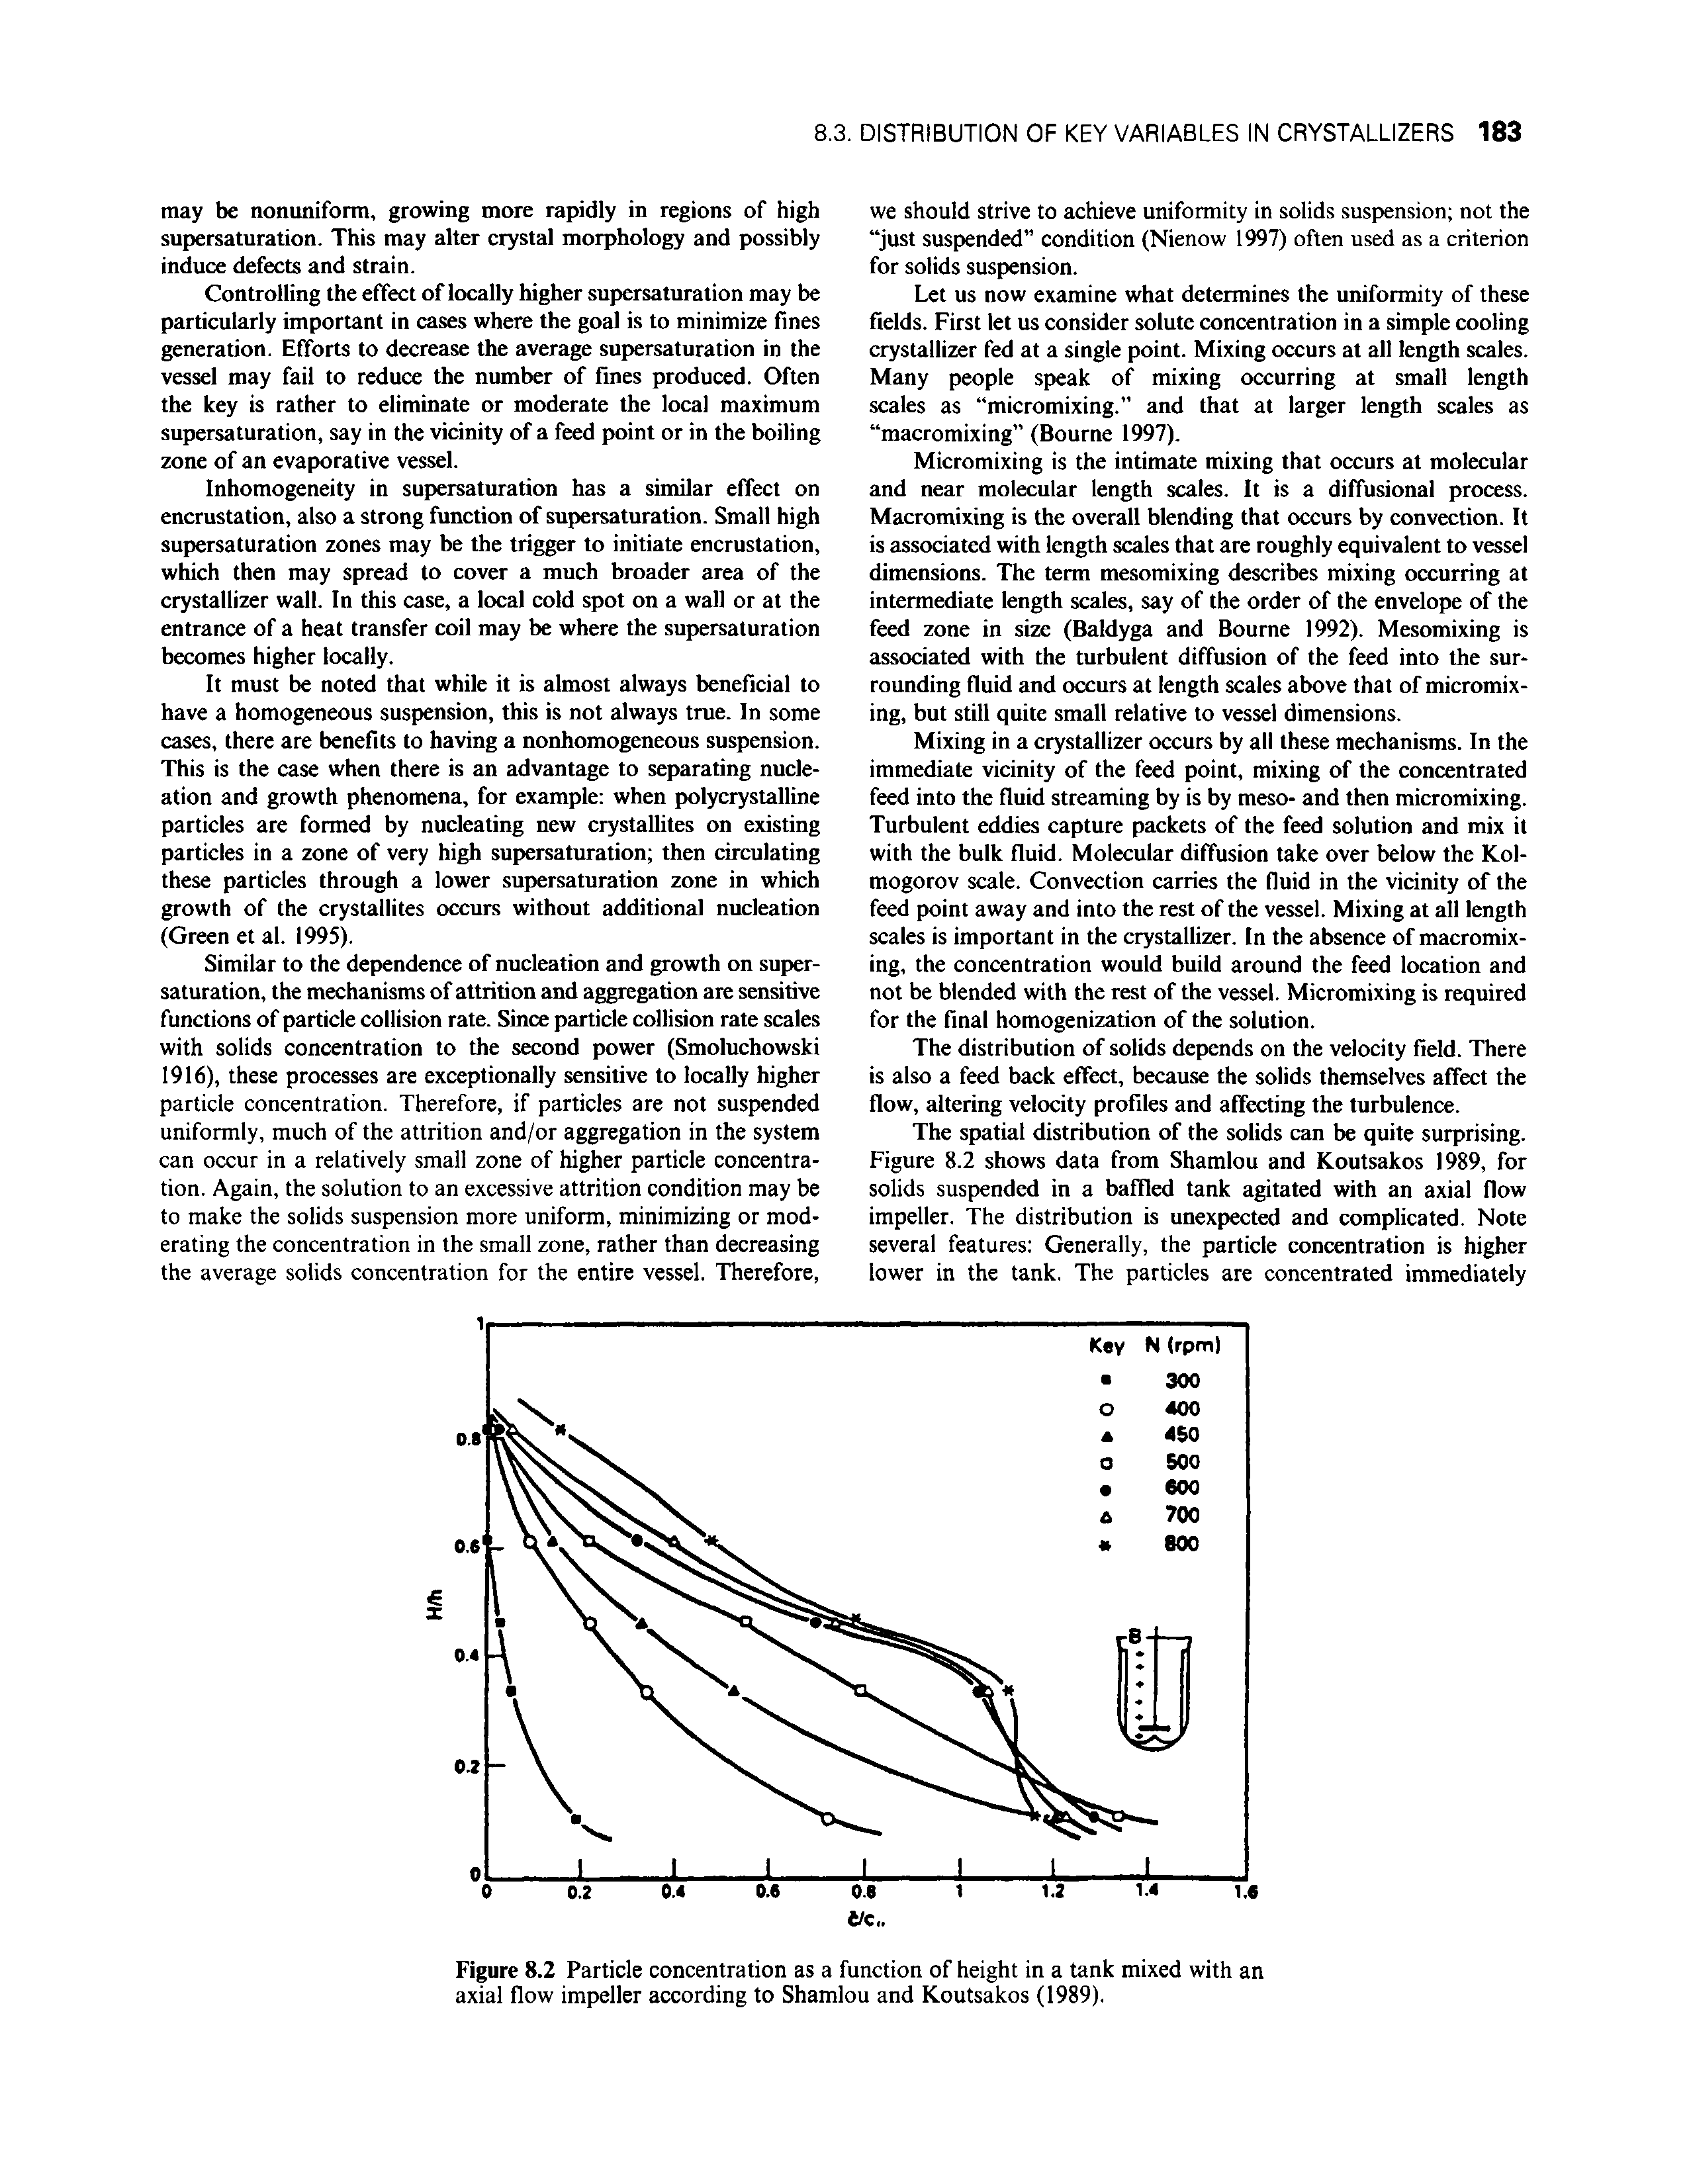 Figure 8.2 Particle concentration as a function of height in a tank mixed with an axial flow impeller according to Shamlou and Koutsakos (1989).